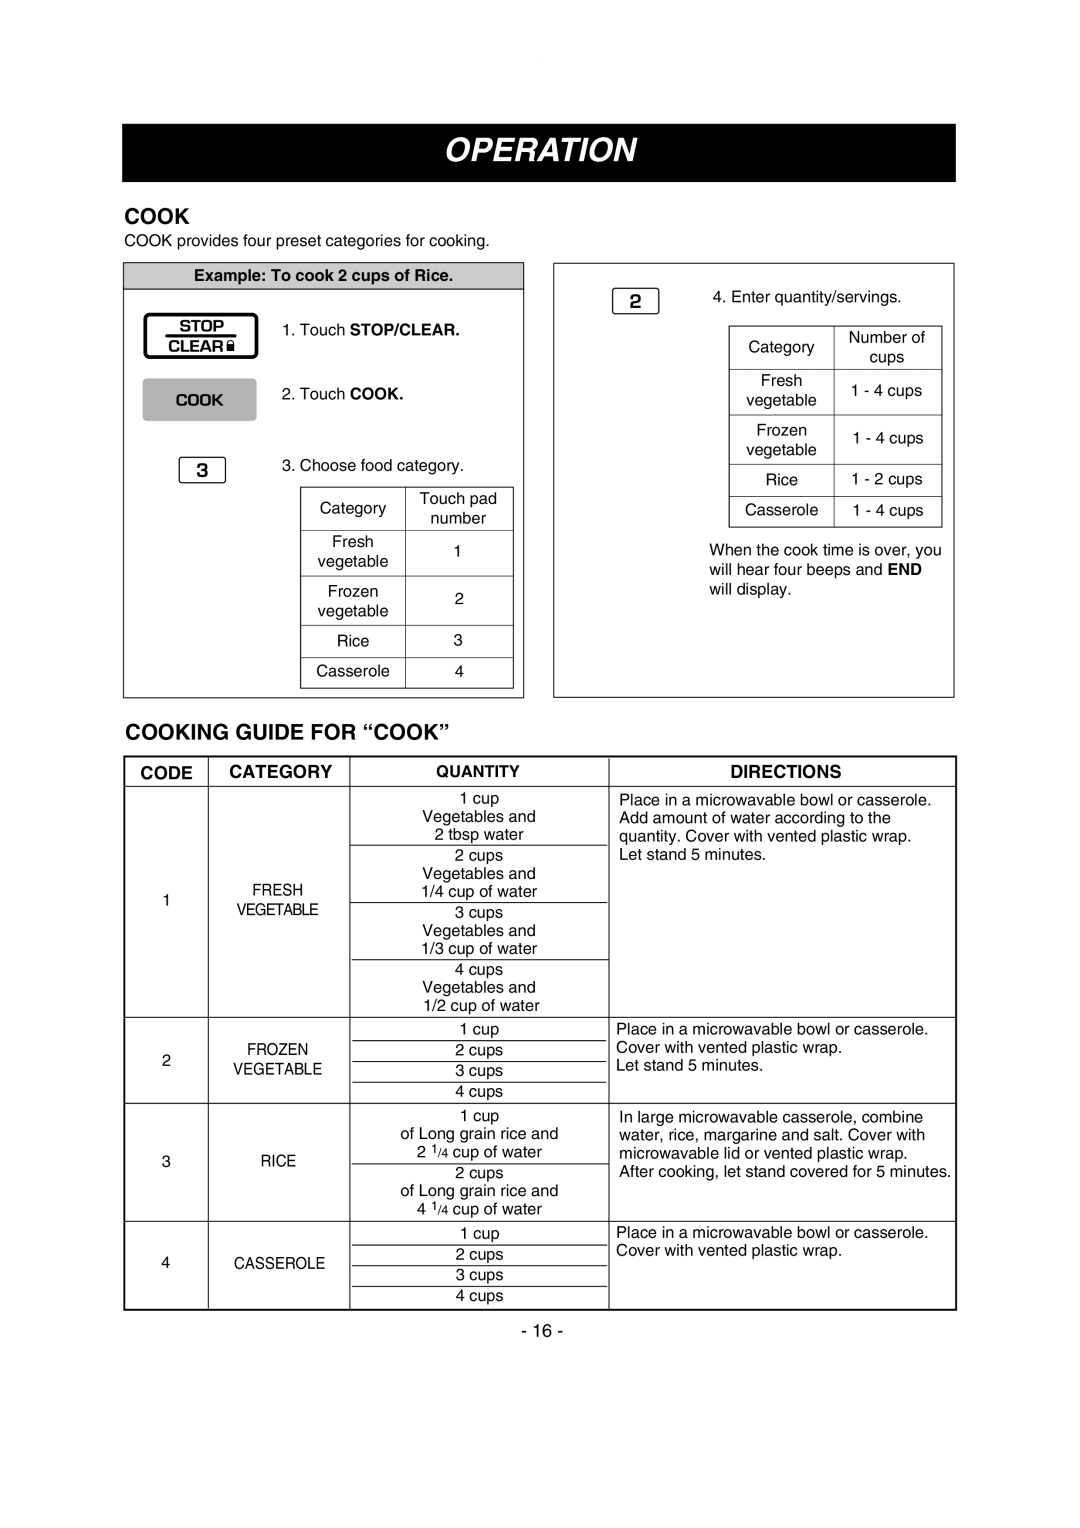 LG Electronics MV1615W, MV1615B owner manual Cooking Guide For “Cook”, Operation, Code, Category, Directions 